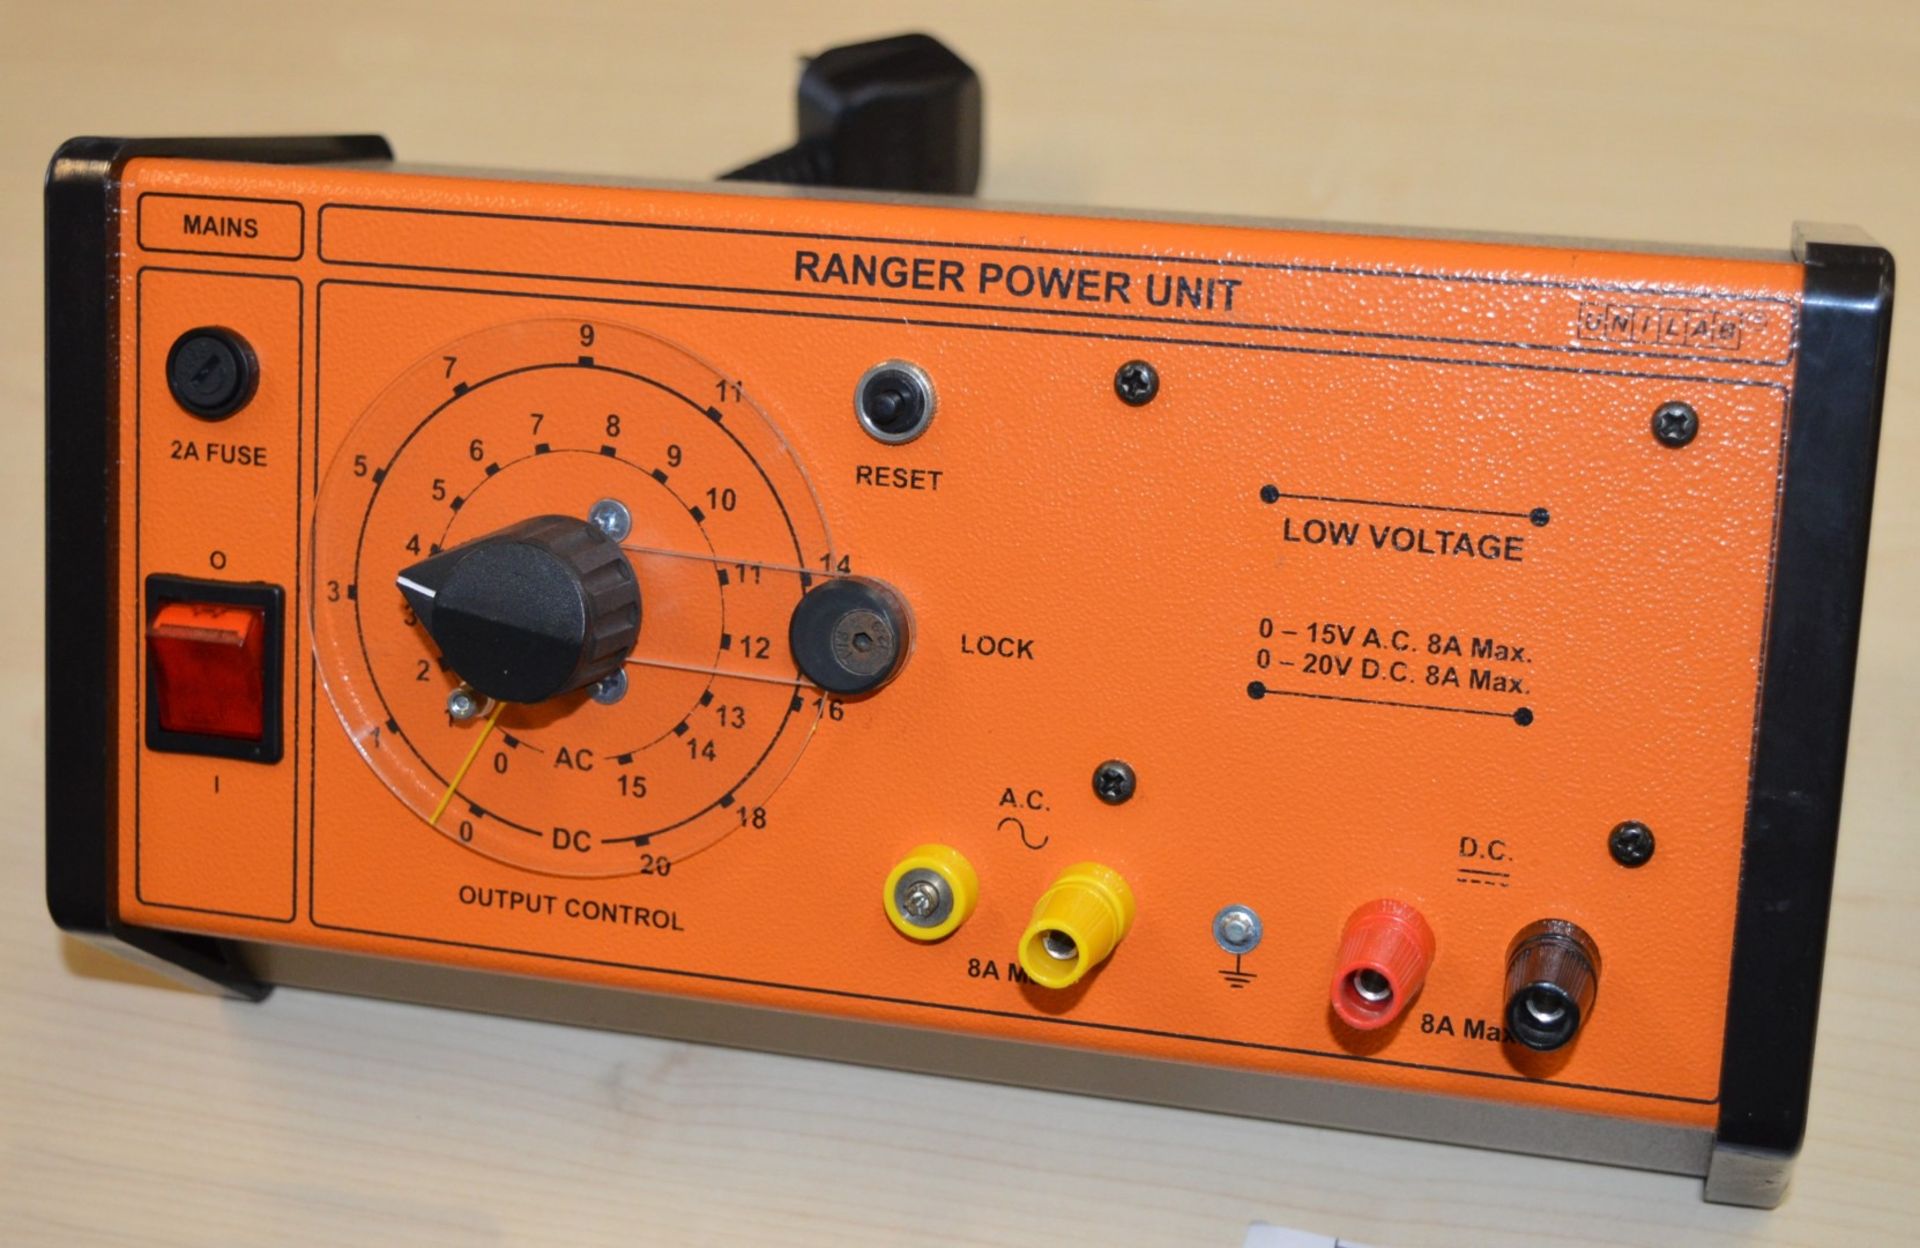 1 x Ranger Power Unit - Retro Range - Variable AC Upto 15 Volts and DC Upto 20 Volts - Ideal For